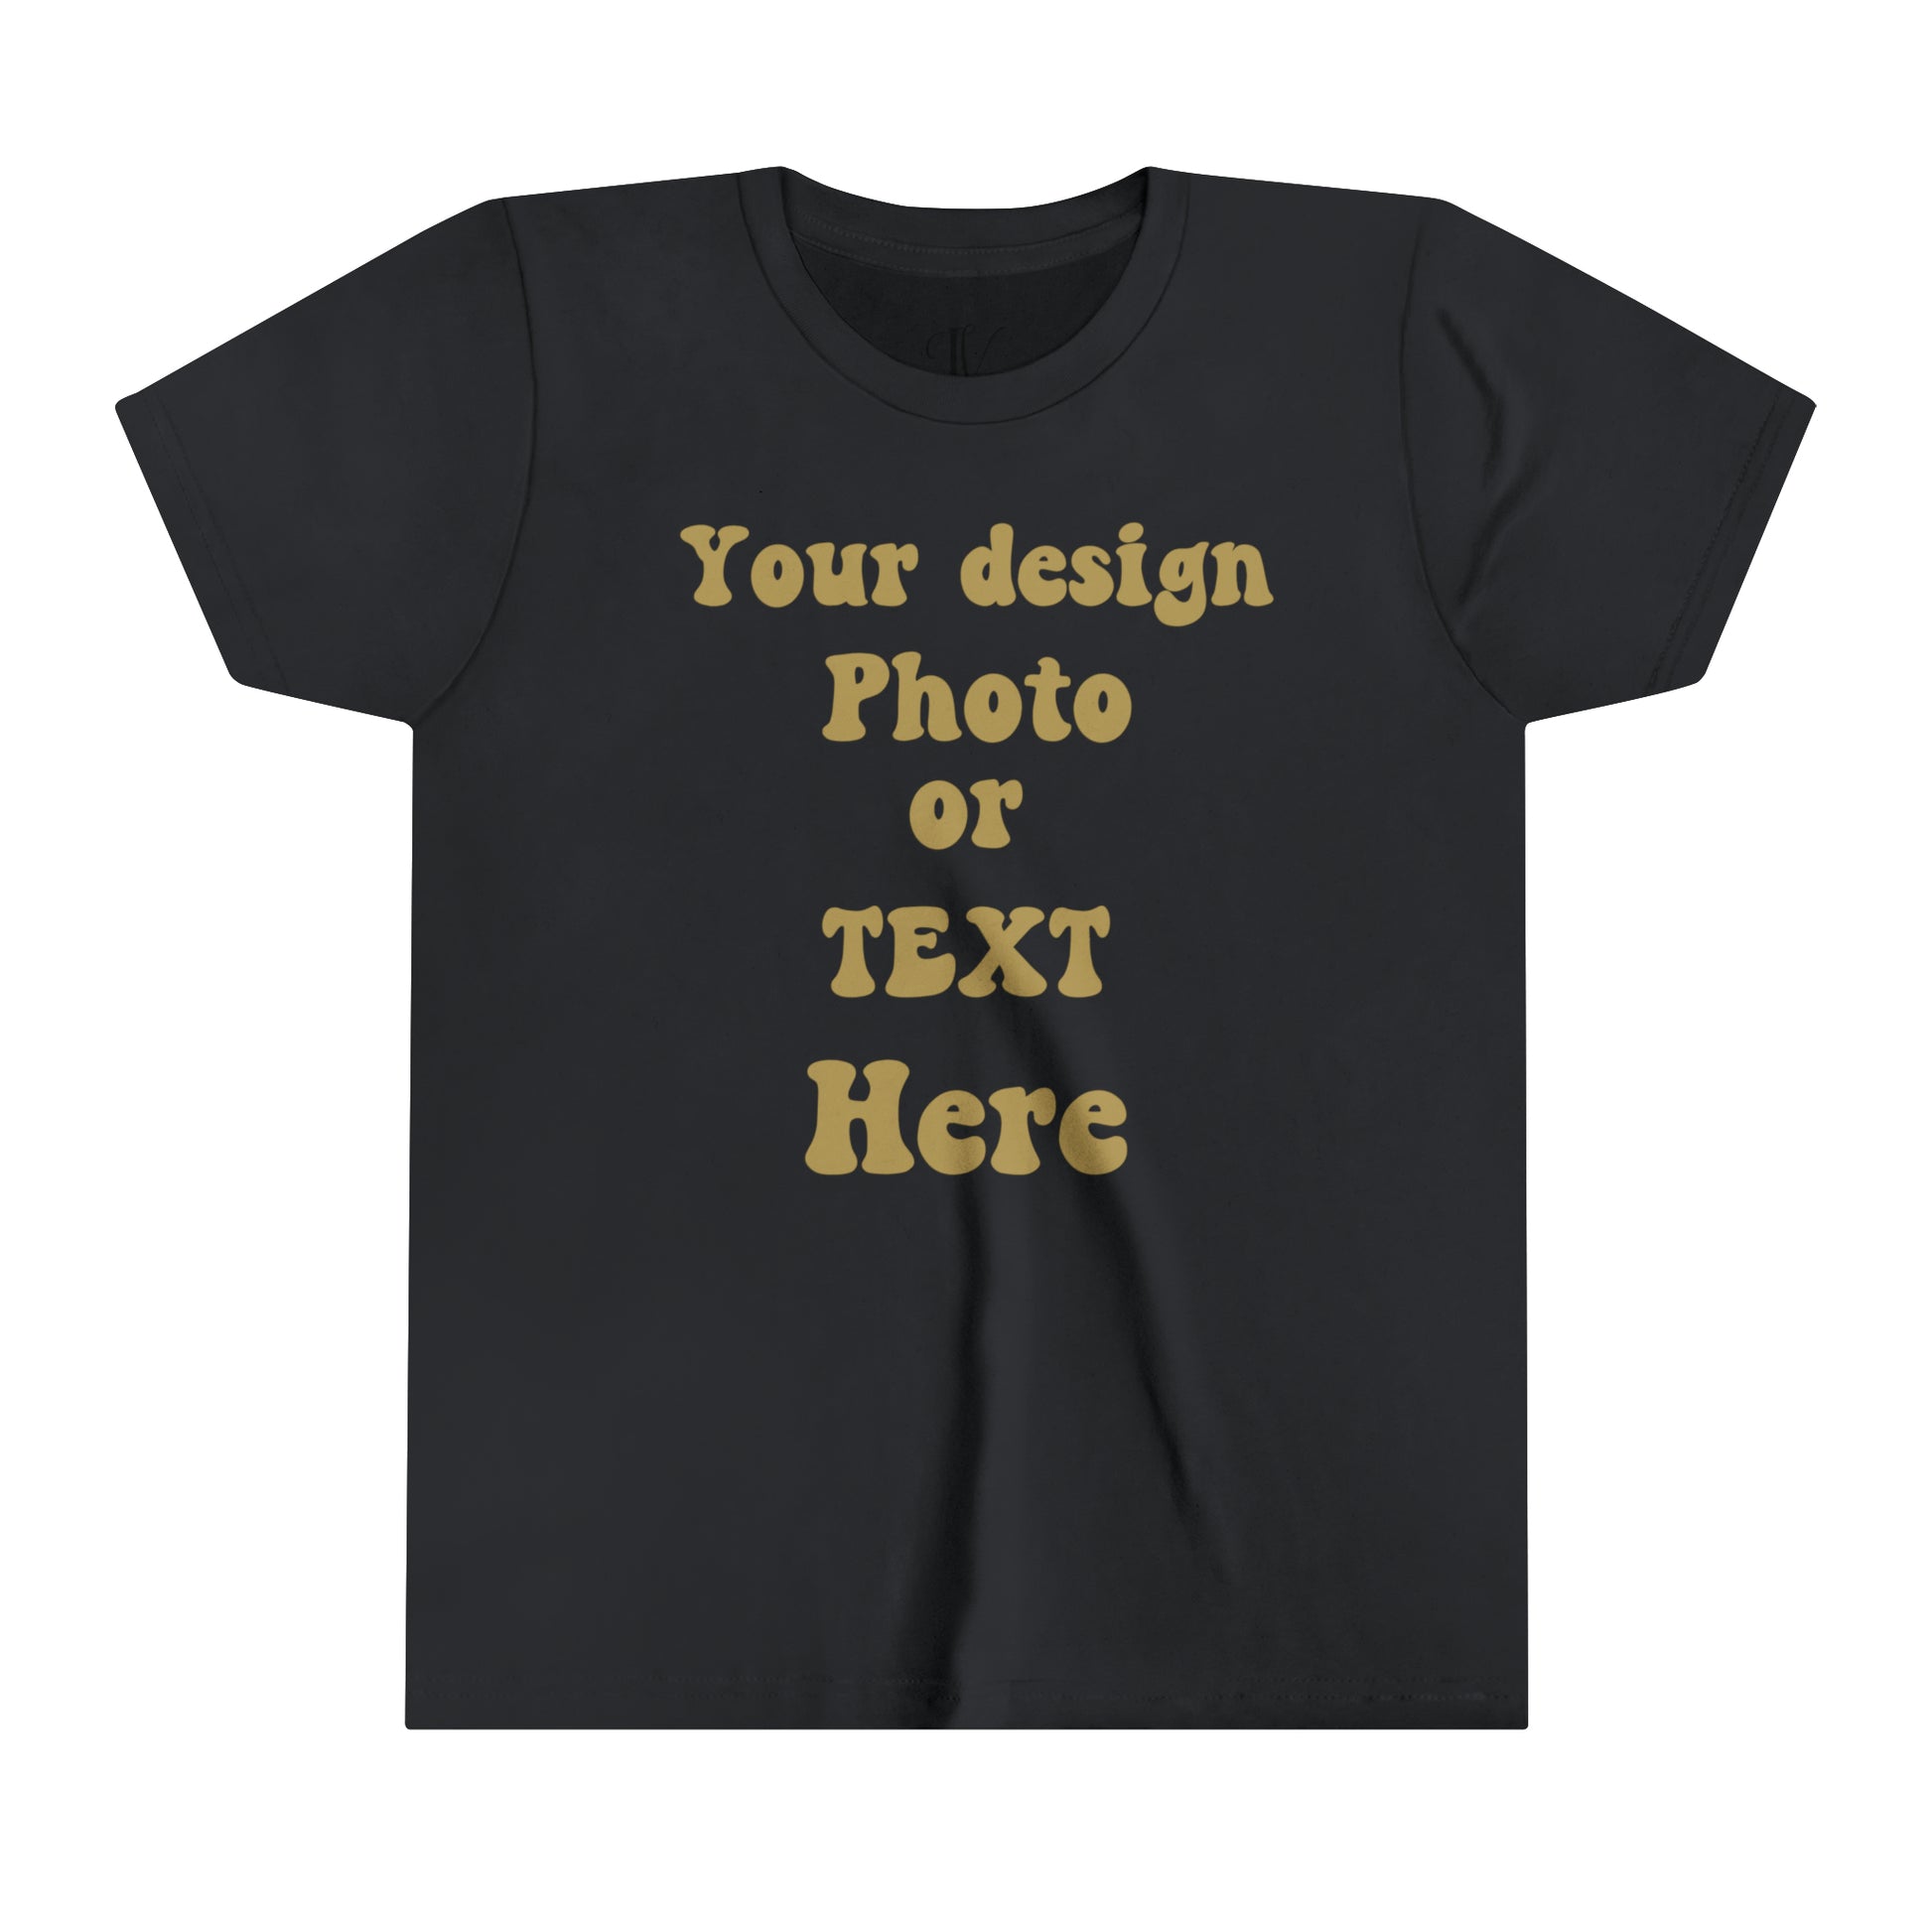 Youth Short Sleeve Tee - Personalized with Your Photo, Text, and Design Kids clothes Vintage Black S 